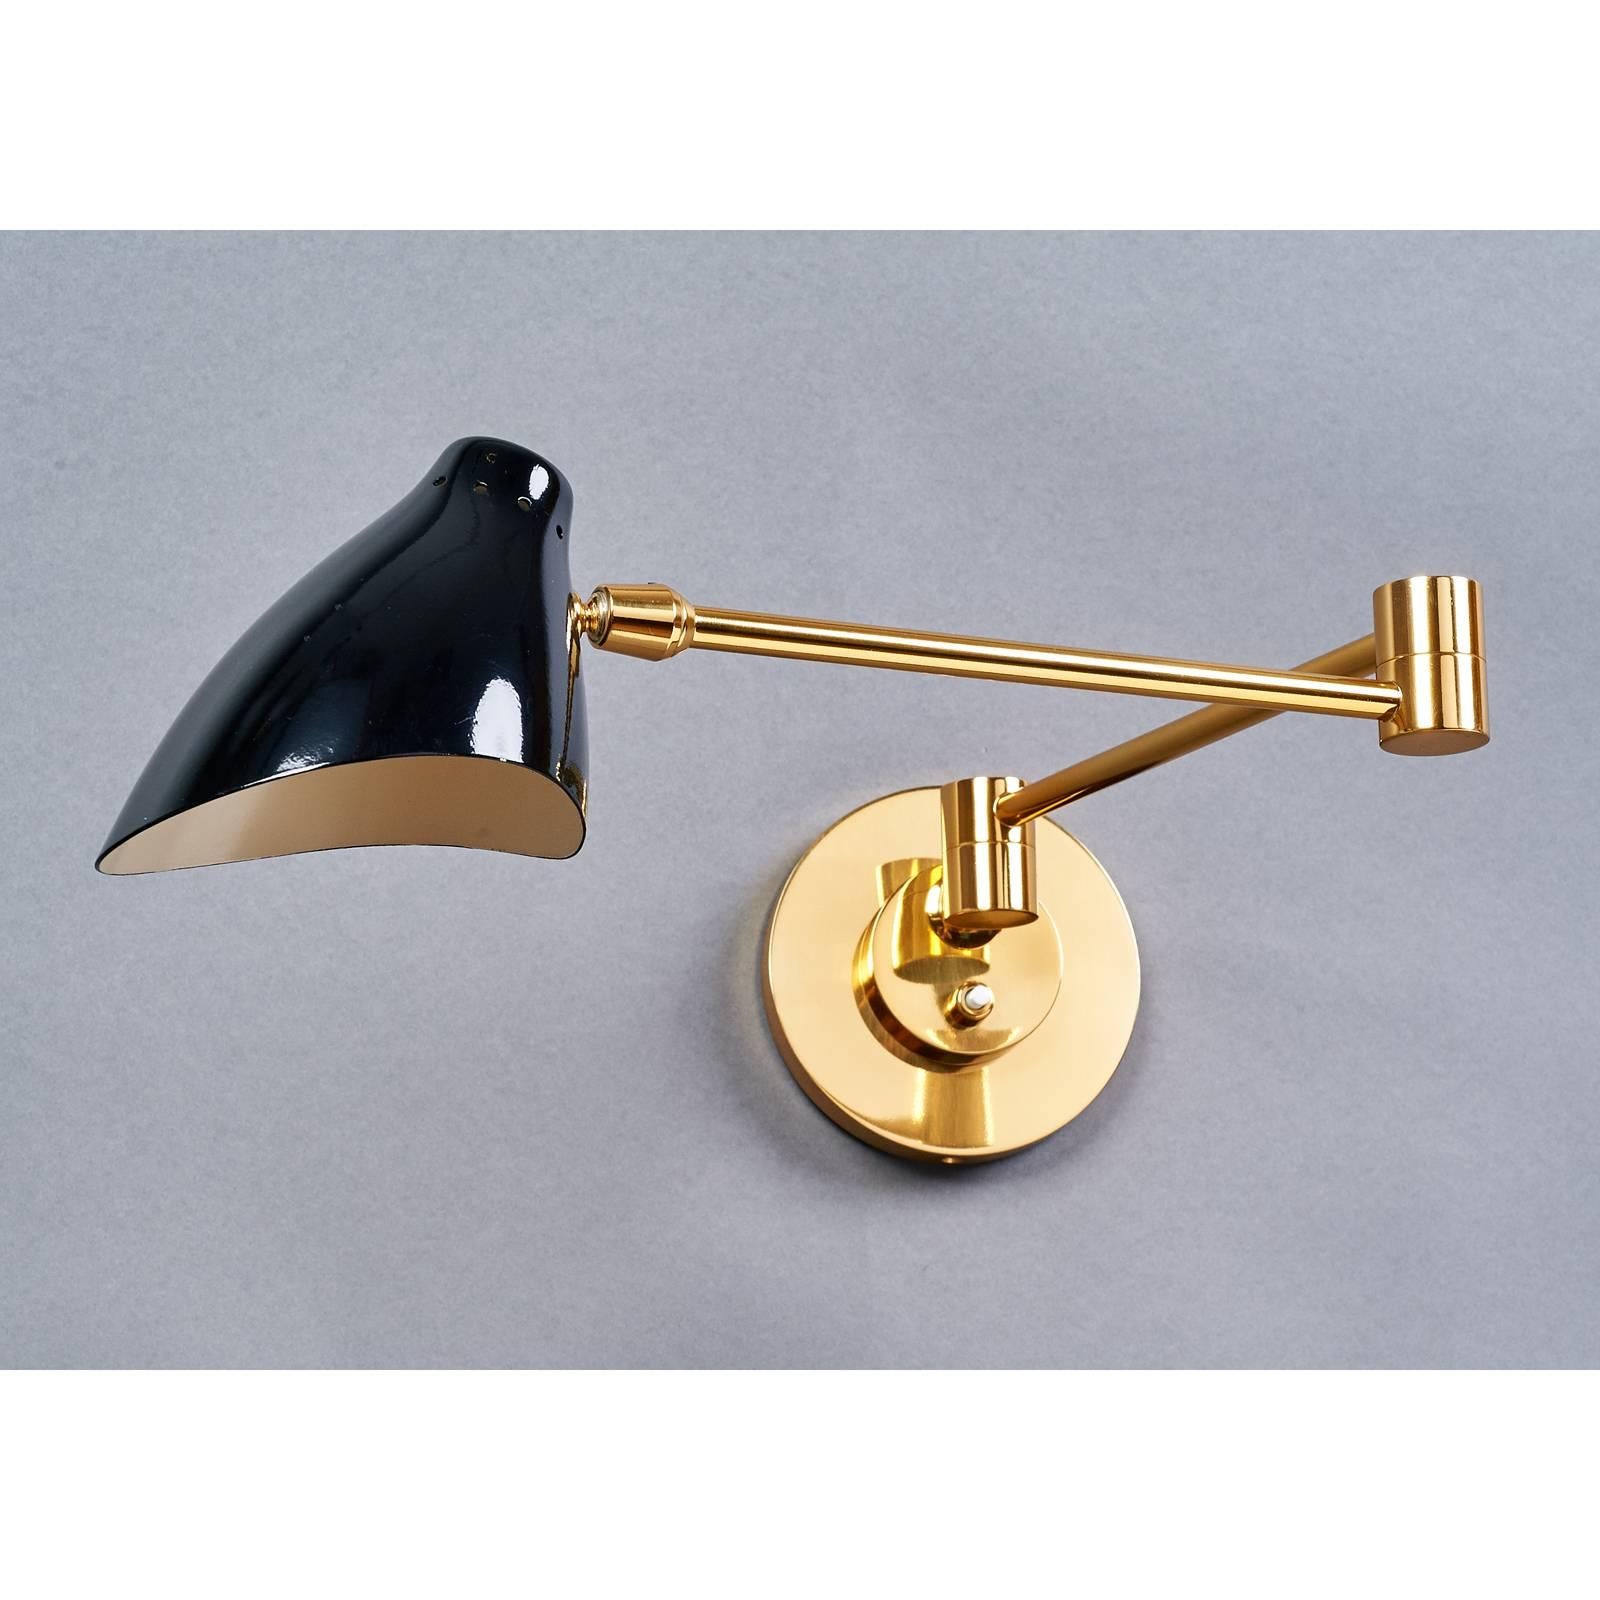 Italy, 1950s
A lovely and diminutive pair of polished brass swing arm sconces with
elegantly turned perforated elliptical shade in black enamel.
Arm: folded 14 (9 off center); extended 24;
Backplate: 4.5 Ø
Rewired for use in the USA.